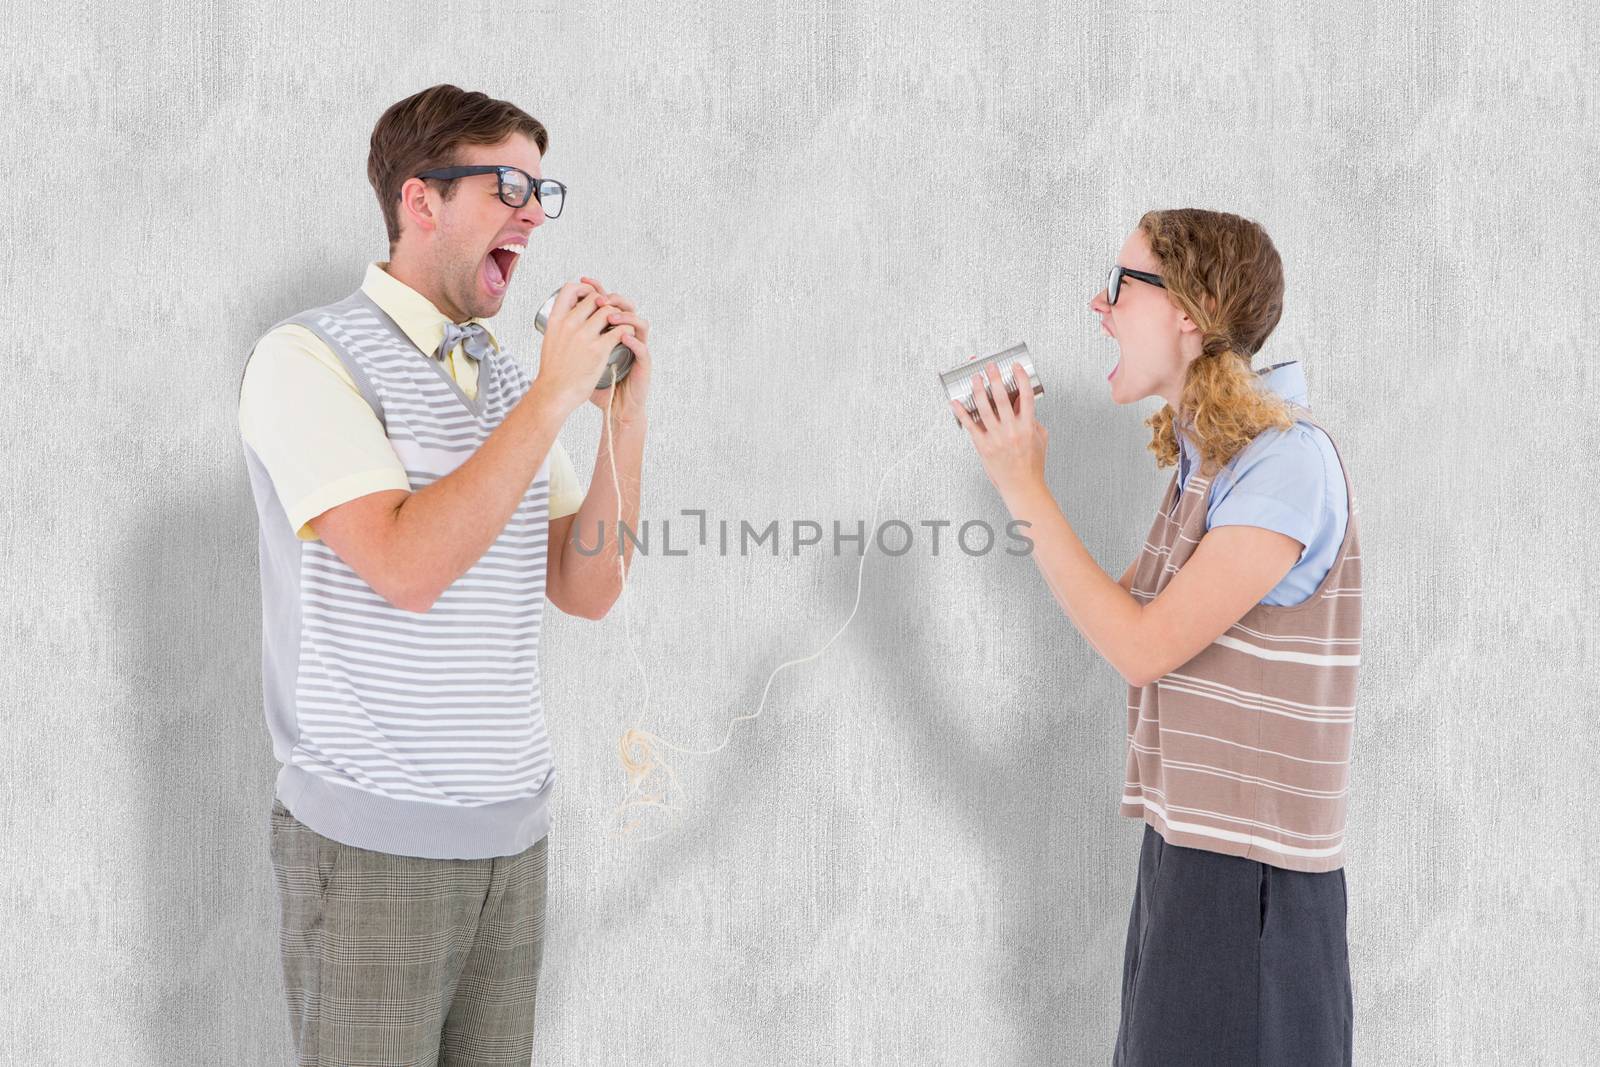 Geeky hipster couple speaking with tin can phone  against white background